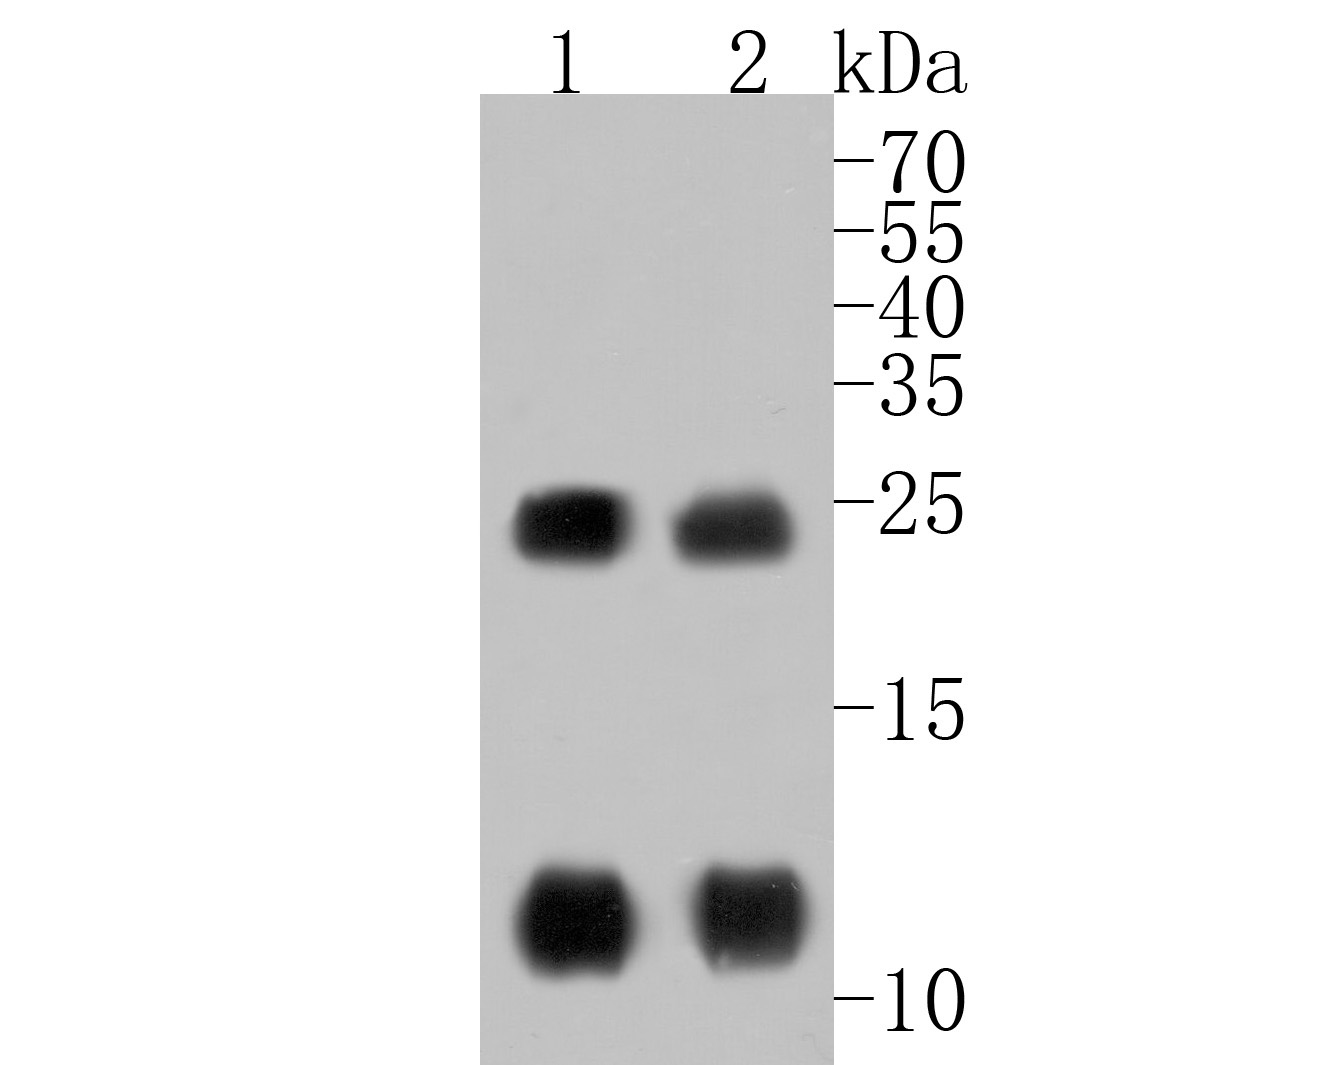 Western blot analysis of Phospholamban on different lysates. Proteins were transferred to a PVDF membrane and blocked with 5% BSA in PBS for 1 hour at room temperature. The primary antibody (HA500103, 1/1,000) was used in 5% BSA at room temperature for 2 hours. Goat Anti-Rabbit IgG - HRP Secondary Antibody (HA1001) at 1:200,000 dilution was used for 1 hour at room temperature.<br />
Positive control: <br />
Lane 1: Rat heart tissue lysate<br />
Lane 2: Human heart tissue lysate